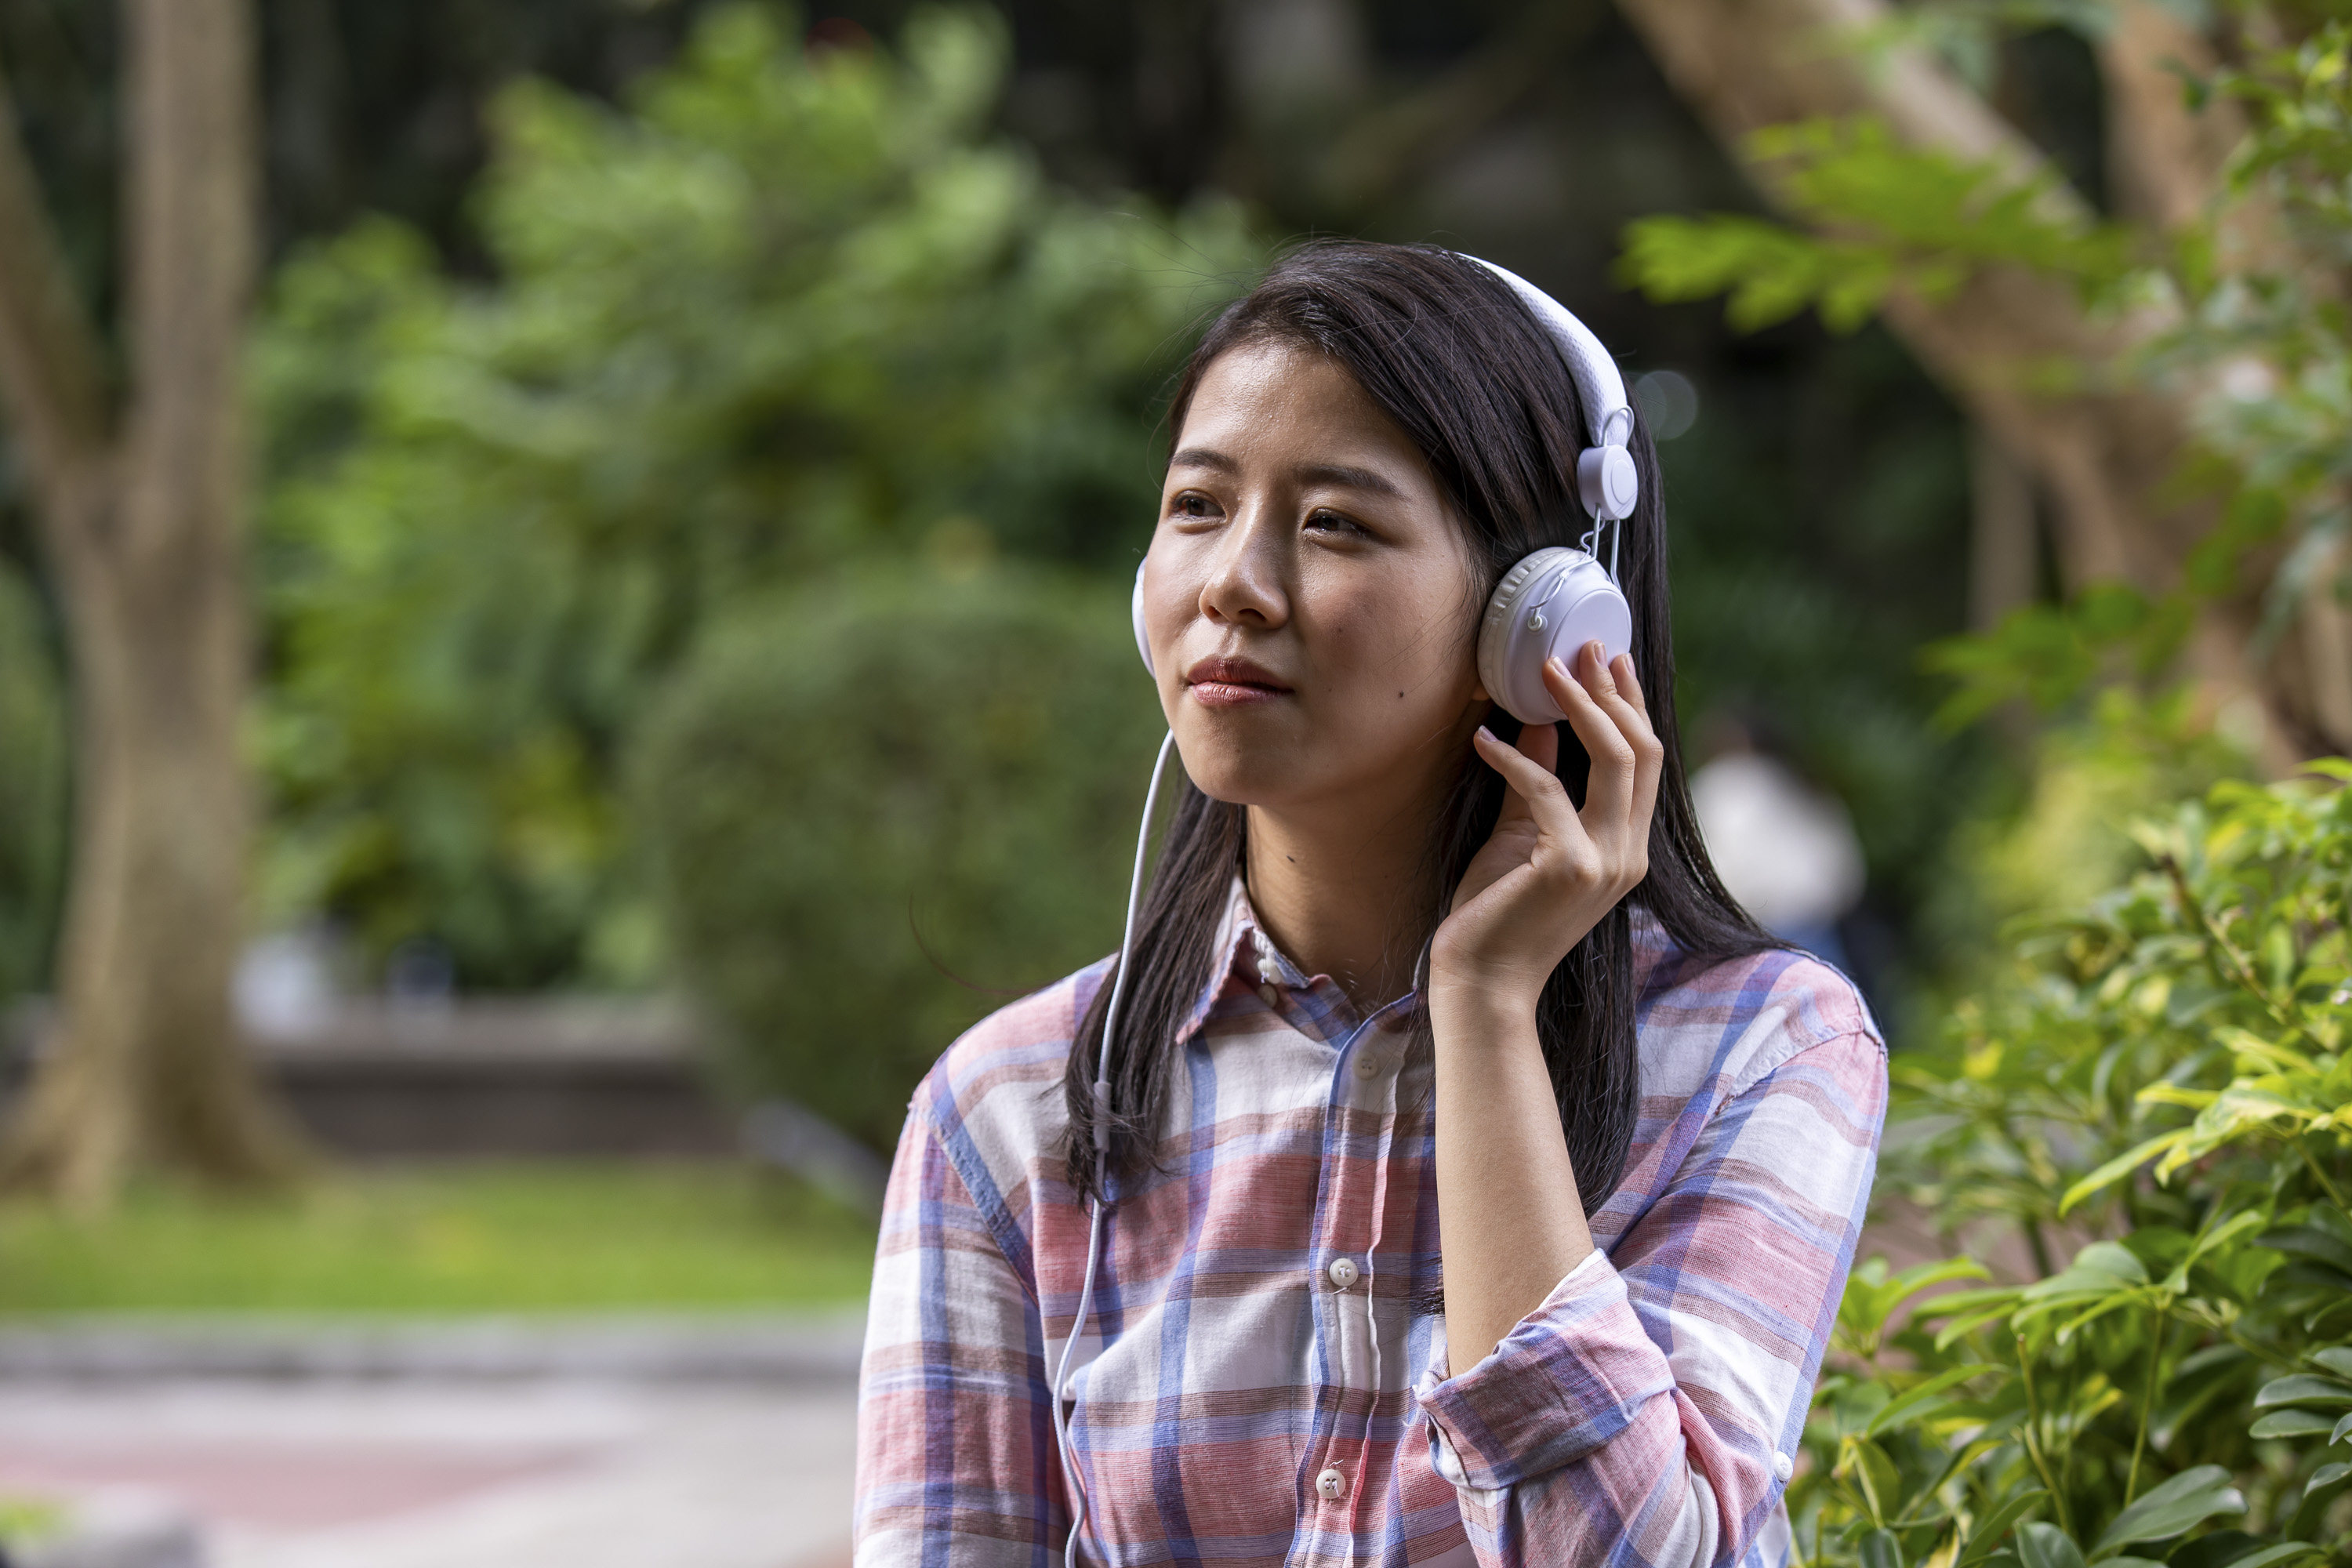 Chinese online audio platform Ximalaya climbs a mountain to eke out first-ever profit, people say